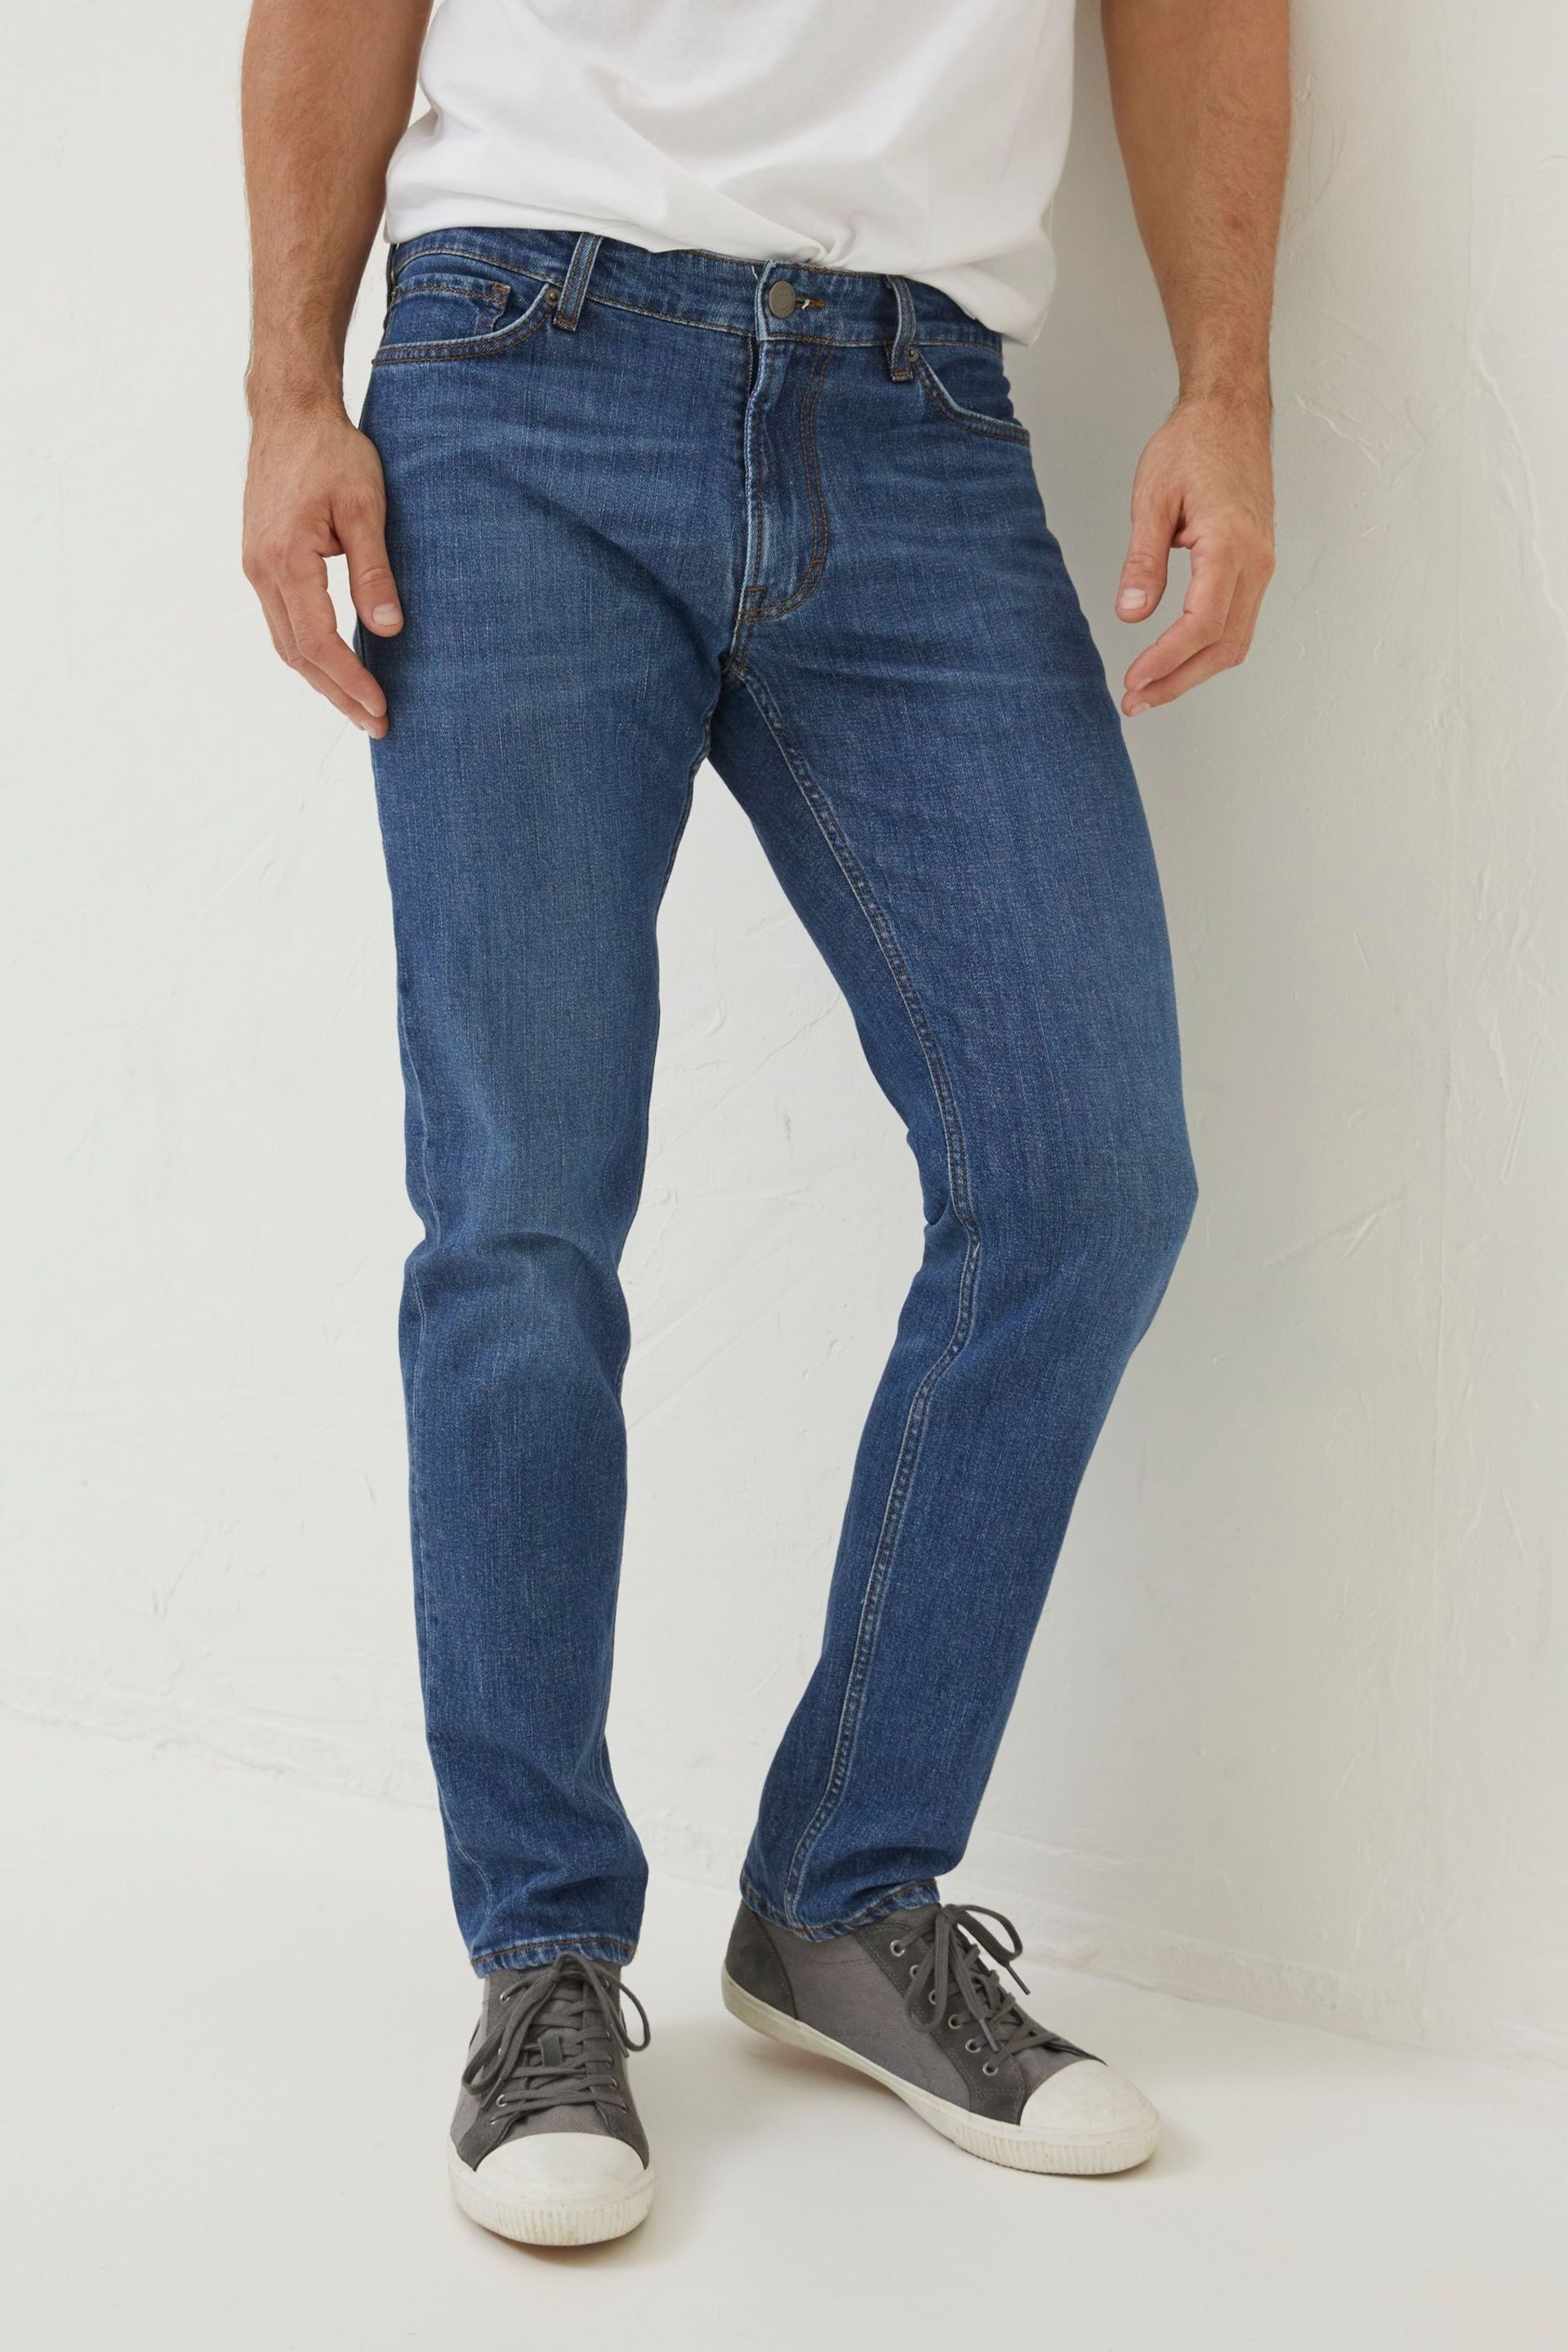 FatFace Blue Slim Mid Wash Jeans - Image 3 of 4